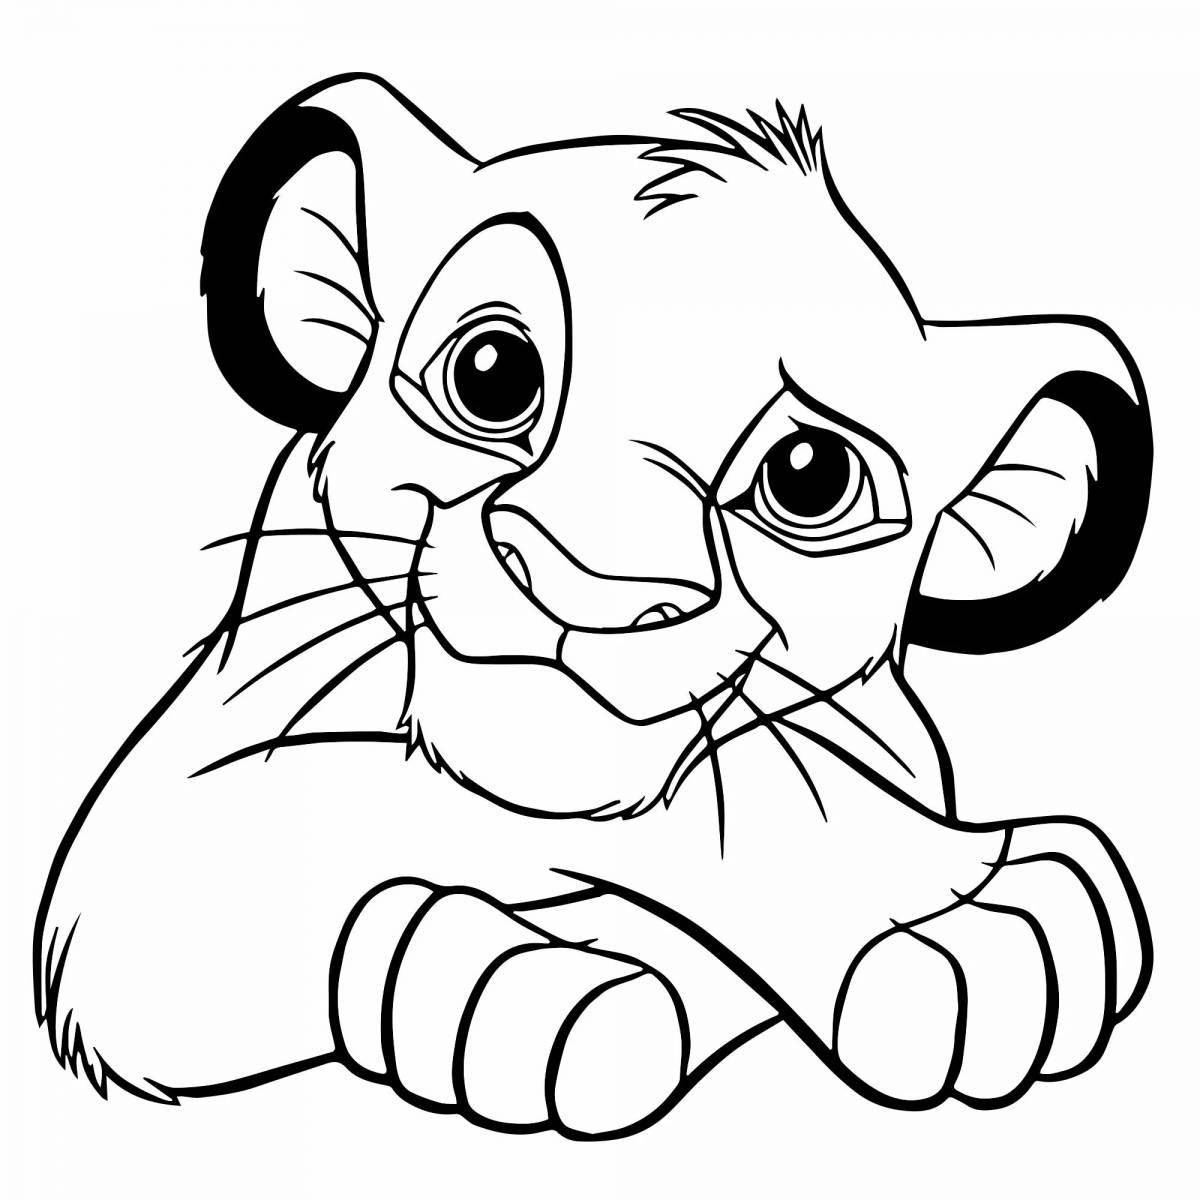 Radiant coloring page good image quality